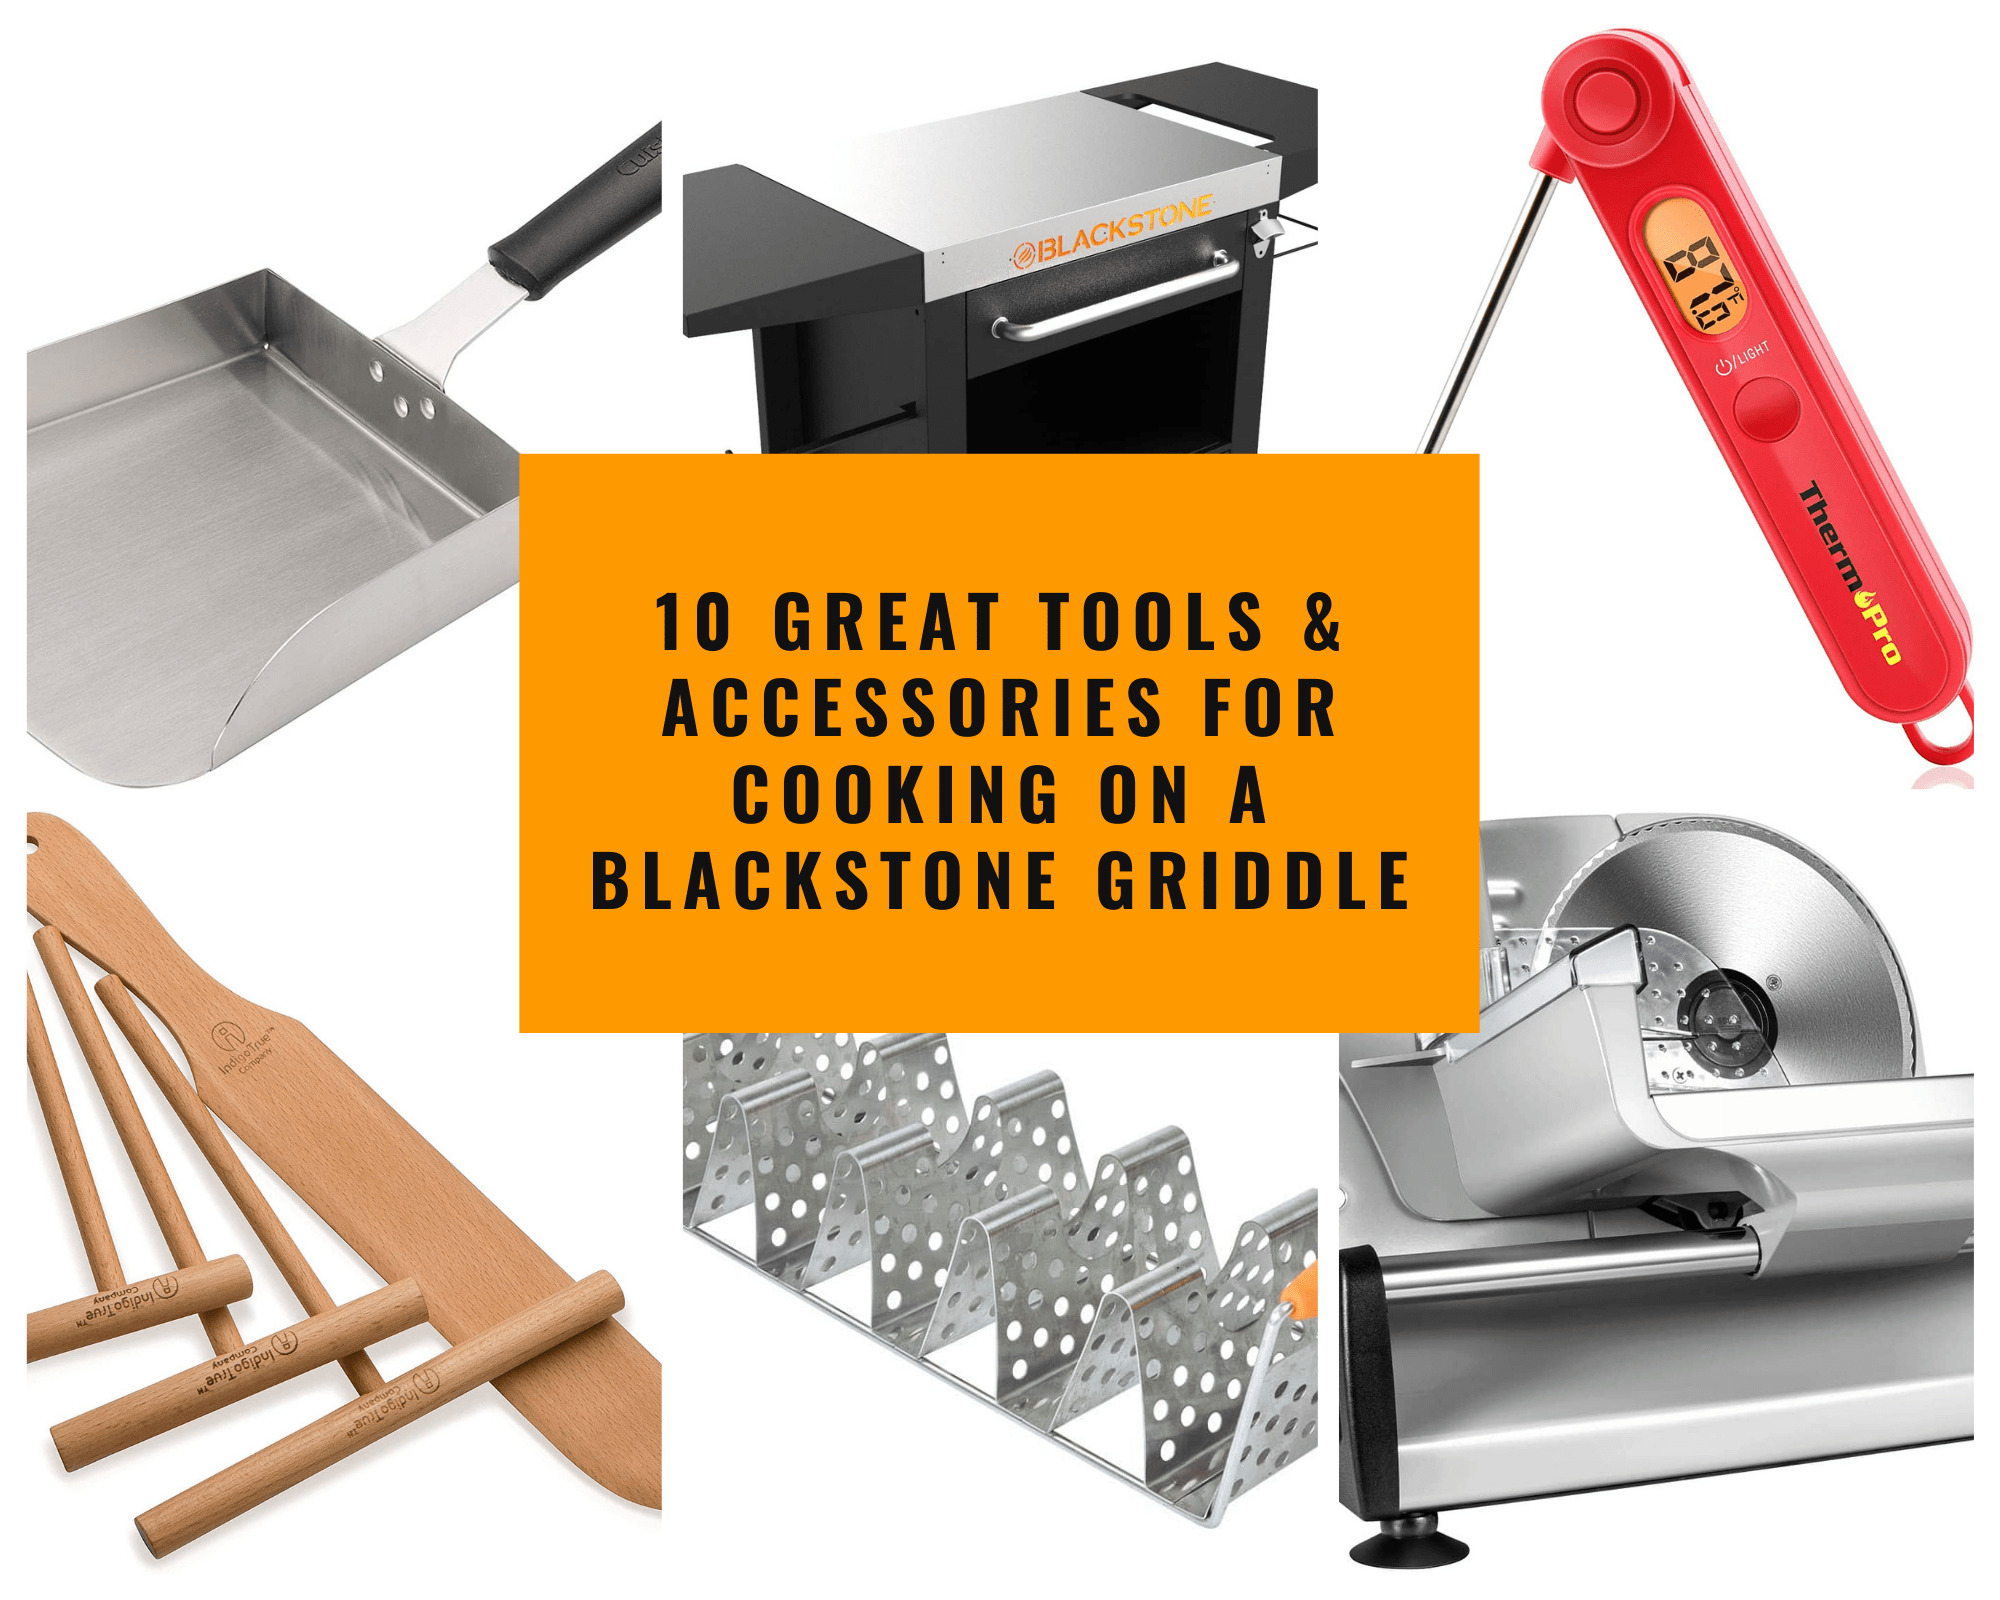 10 Great Tools & Accessories For Cooking On A Blackstone Griddle